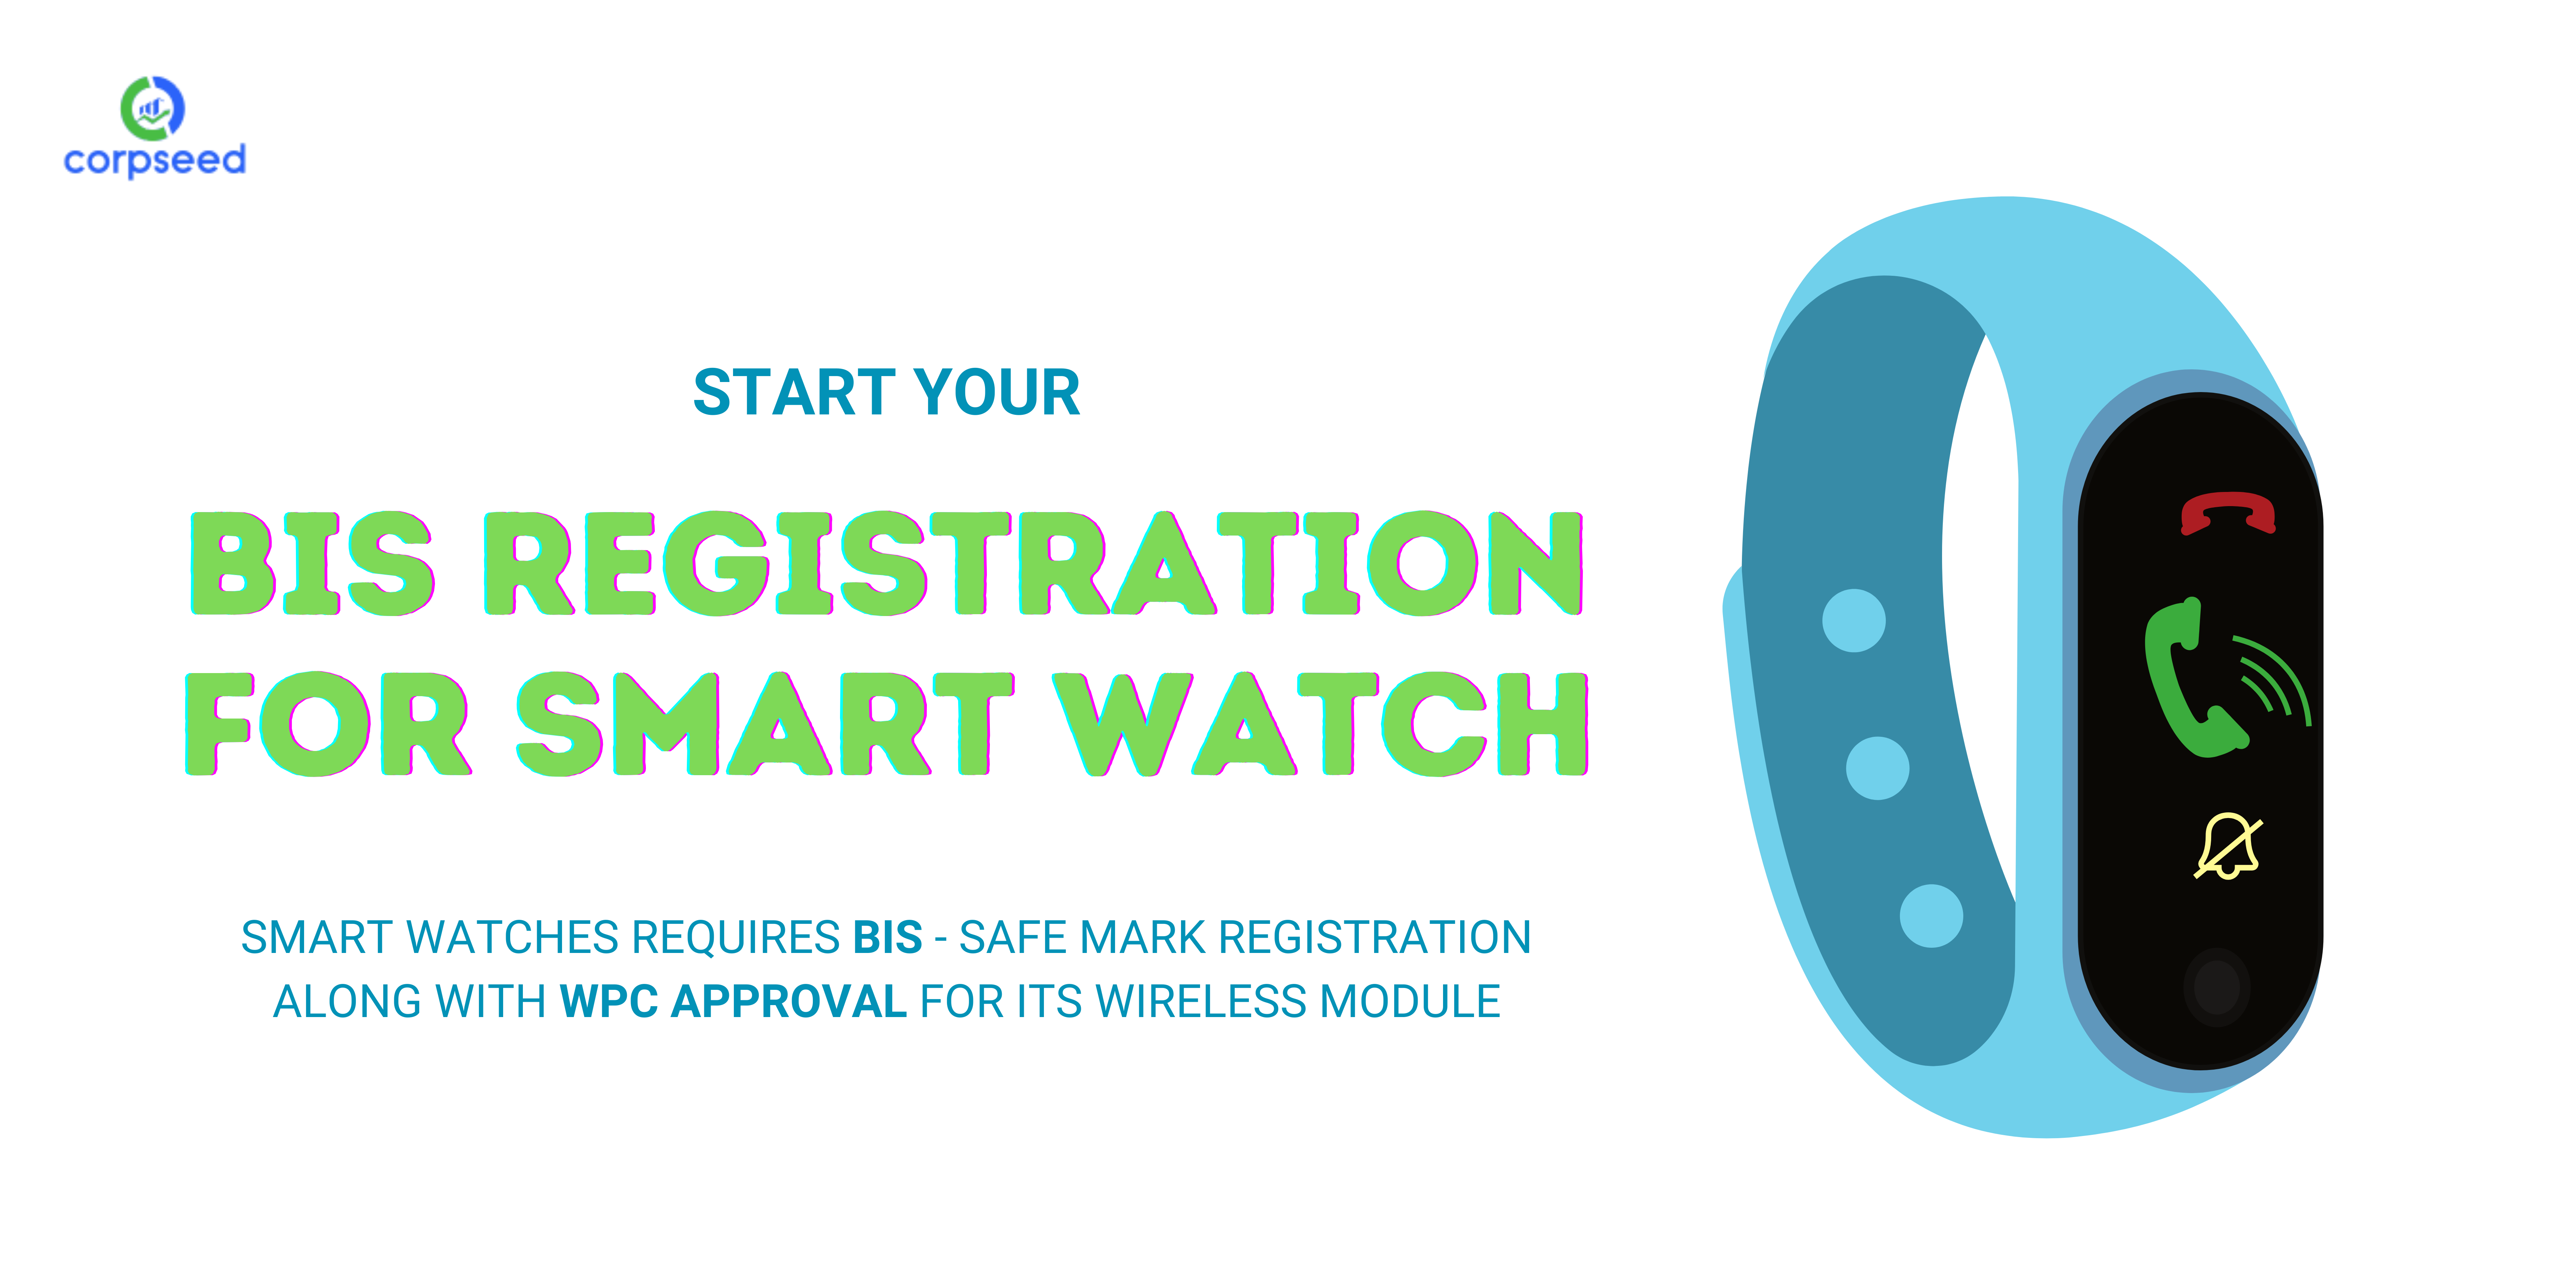 bis-registration-for-smart-watch-corpseed.png